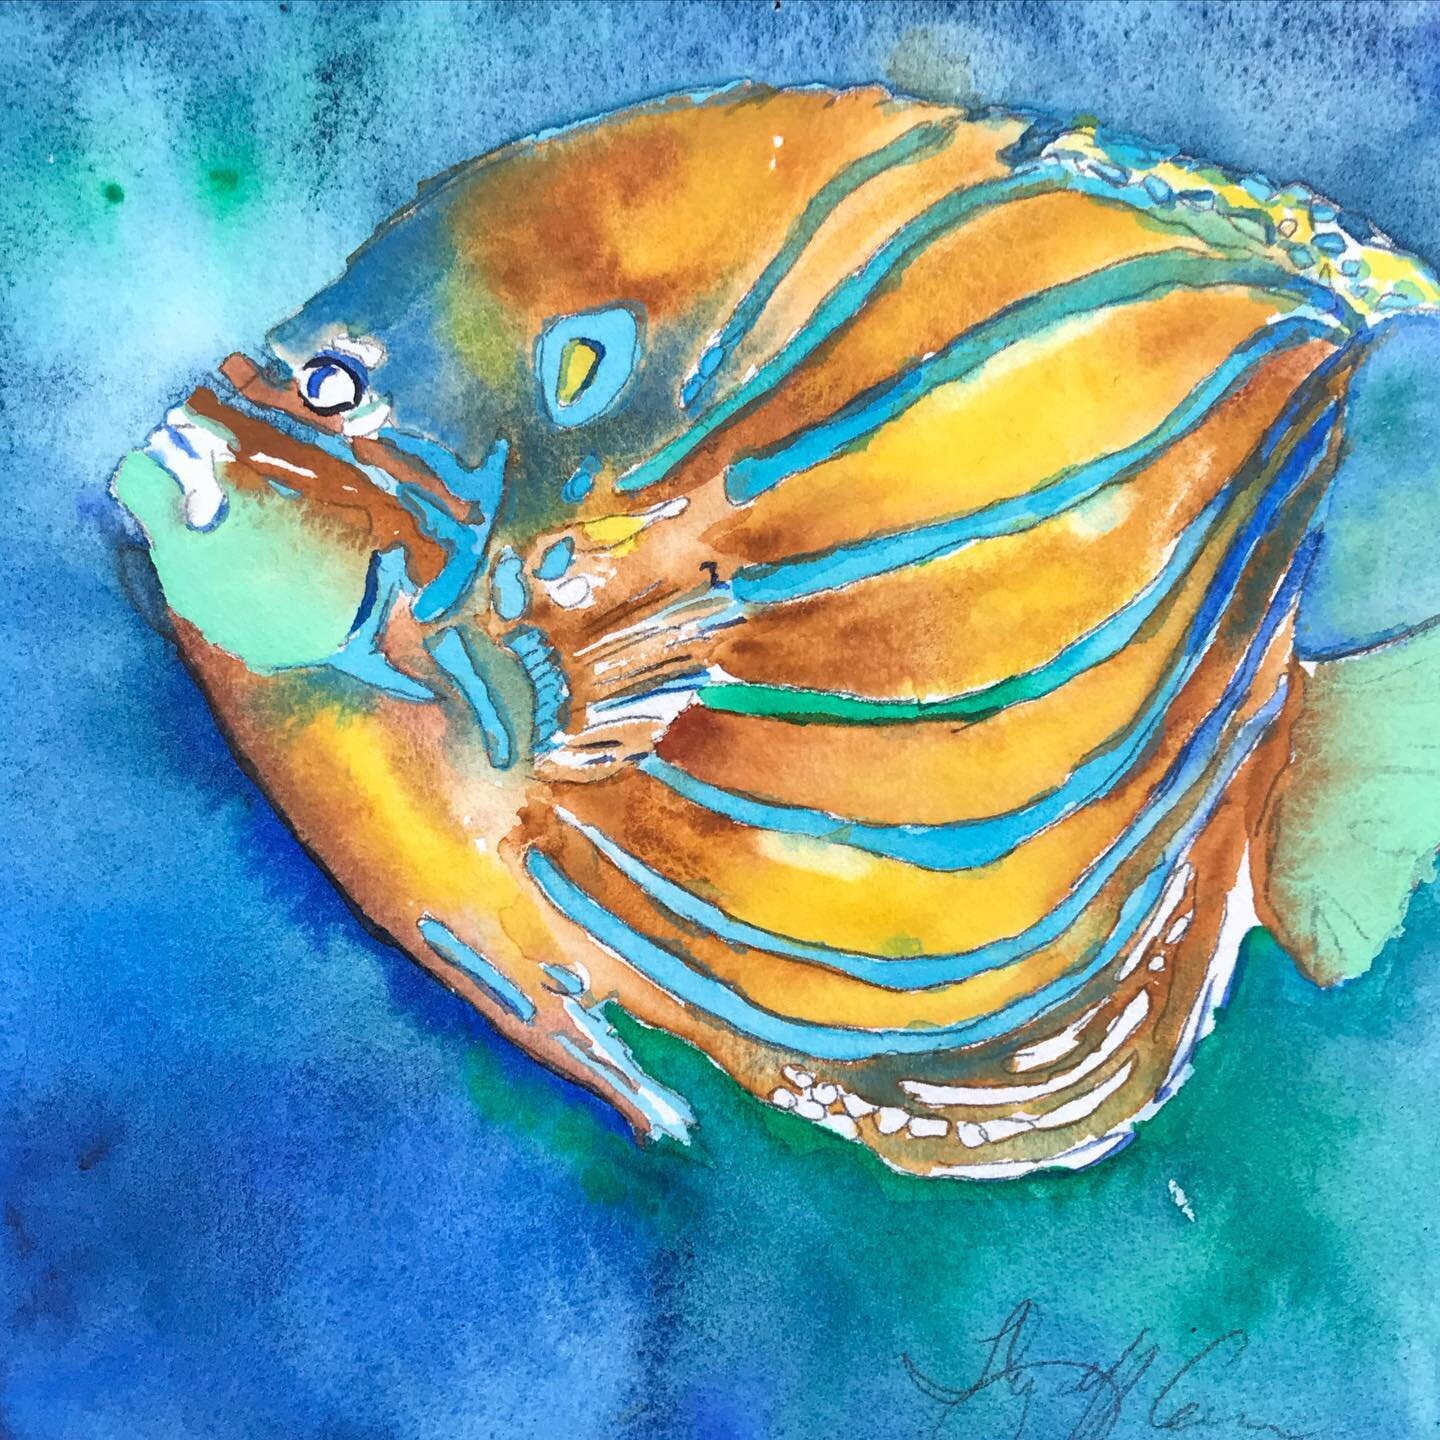 This beautiful fish in blues and greens is a winner!

#watercolorpainting #watercolor #watercolorsketch #watercolorjournaling #tropicalfish #watercoloursketch #watercolourart #watercolourpaint #watercolorpainting #watercolourpainting